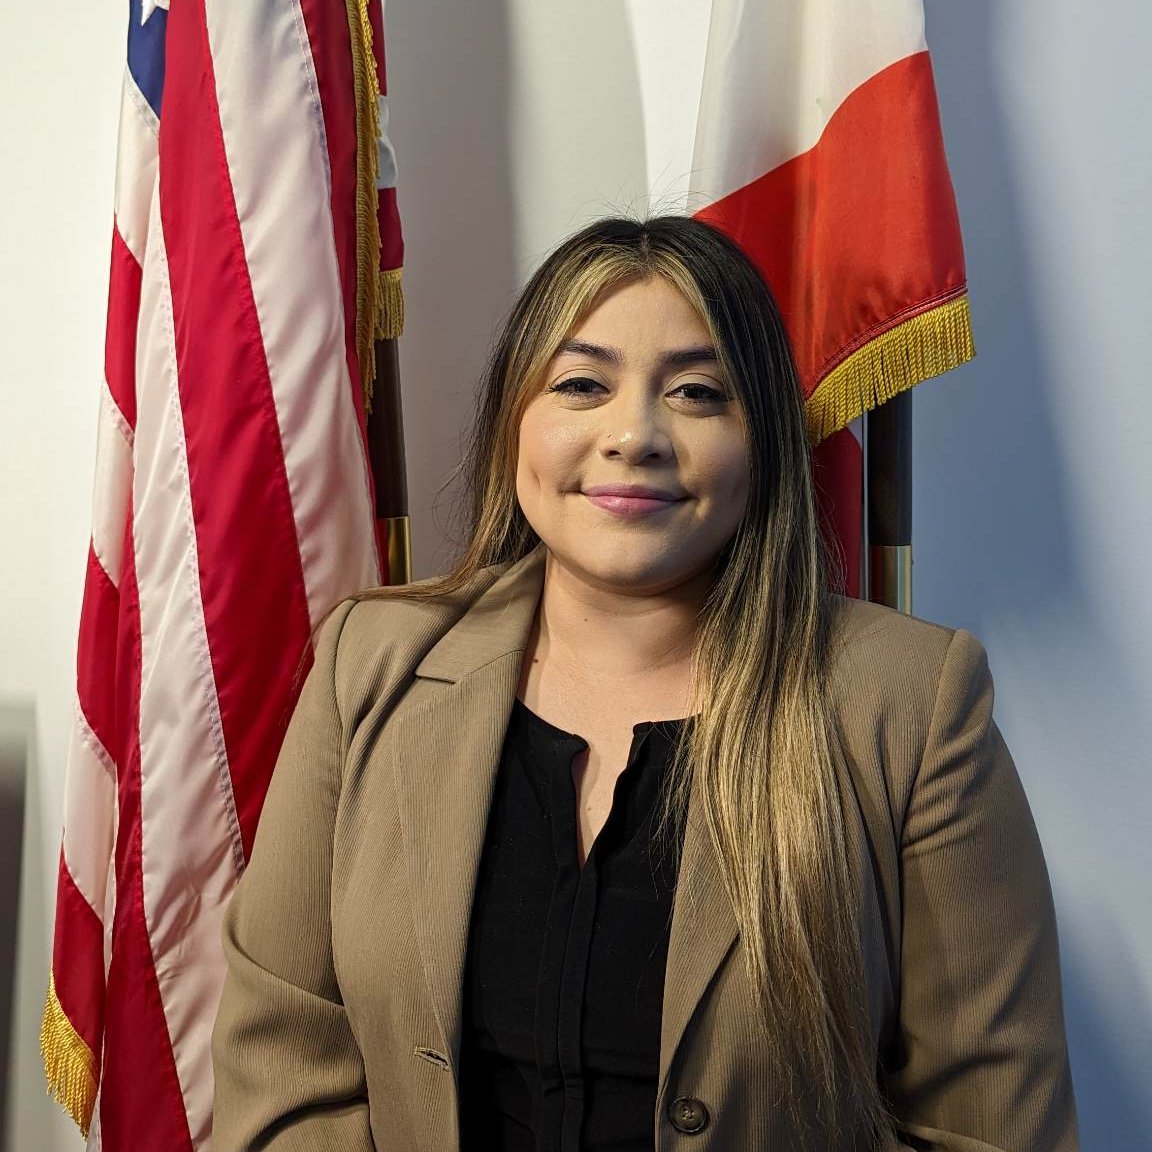 I would like to introduce my new legislative aide, Ms. Cynthia Yepez, a proud daughter of immigrant parents from Salamanca, Guanajuato. She grew up in Bellflower, CA and earned a B.A. in Pol Sci from UC Davis. Last year, Ms. Yepez was a fellow with @SenSusanRubio. Welcome Cynthia